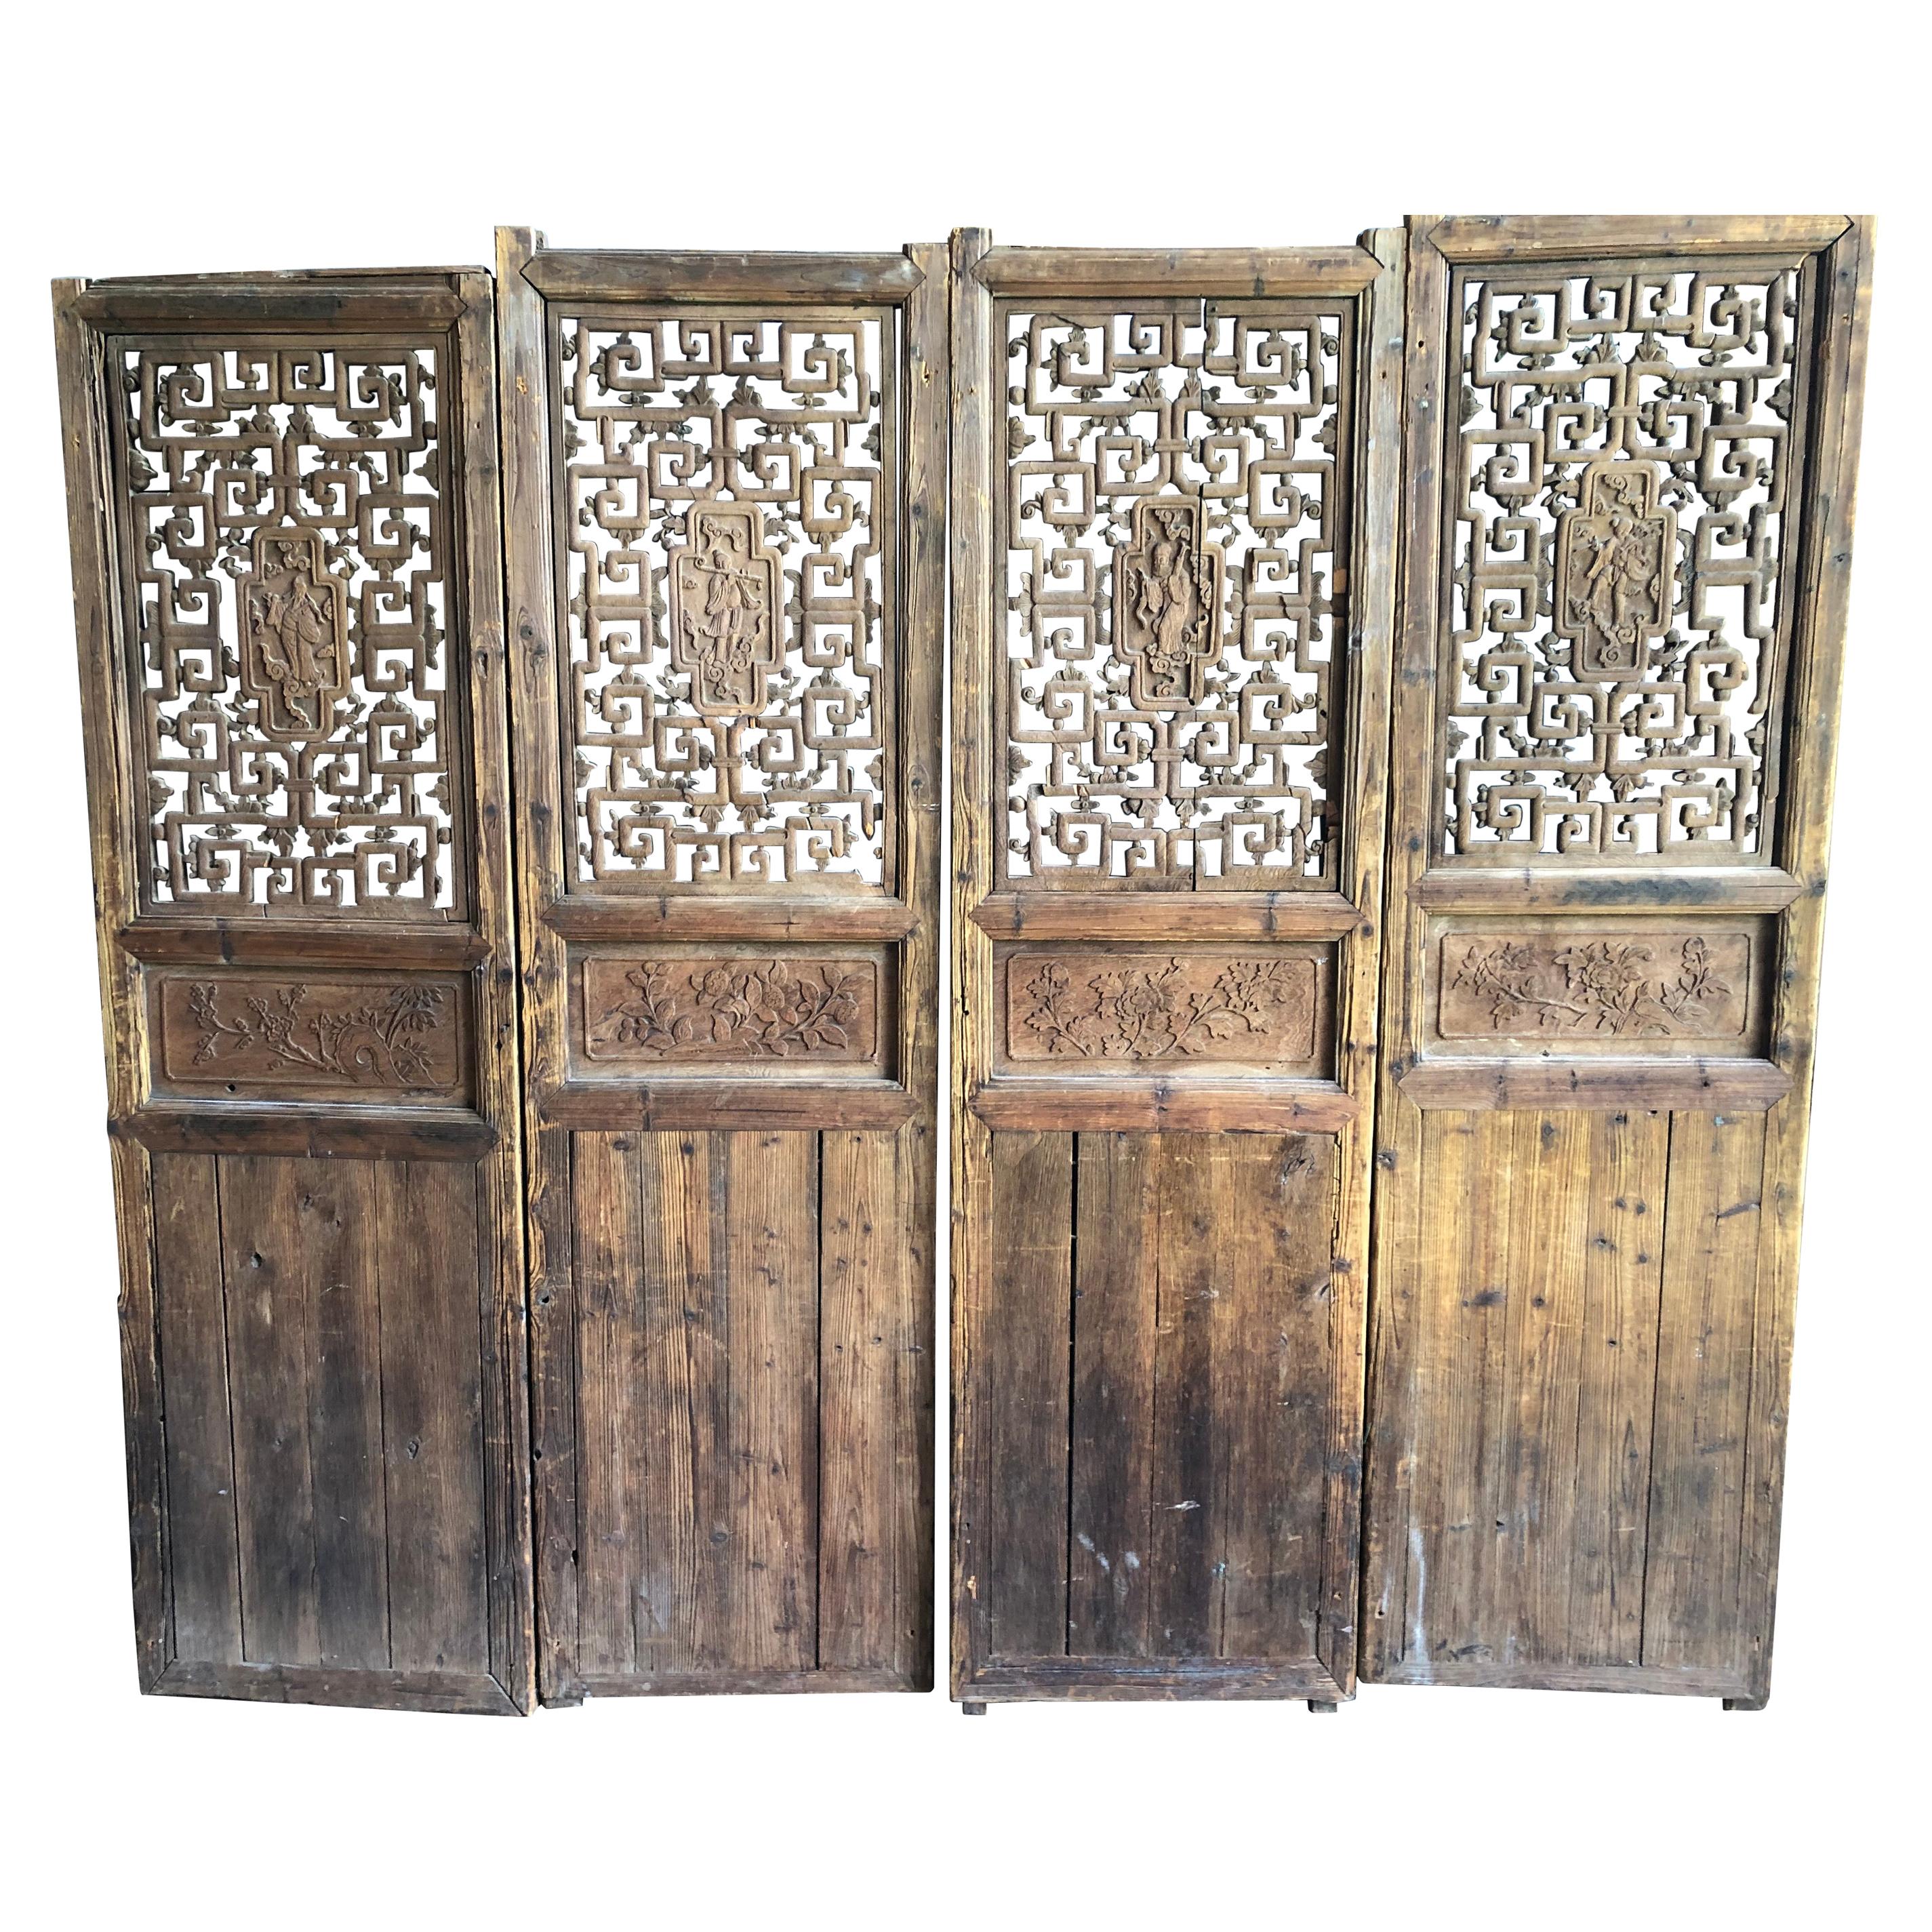 Chinese Carved Doors, 18th Century